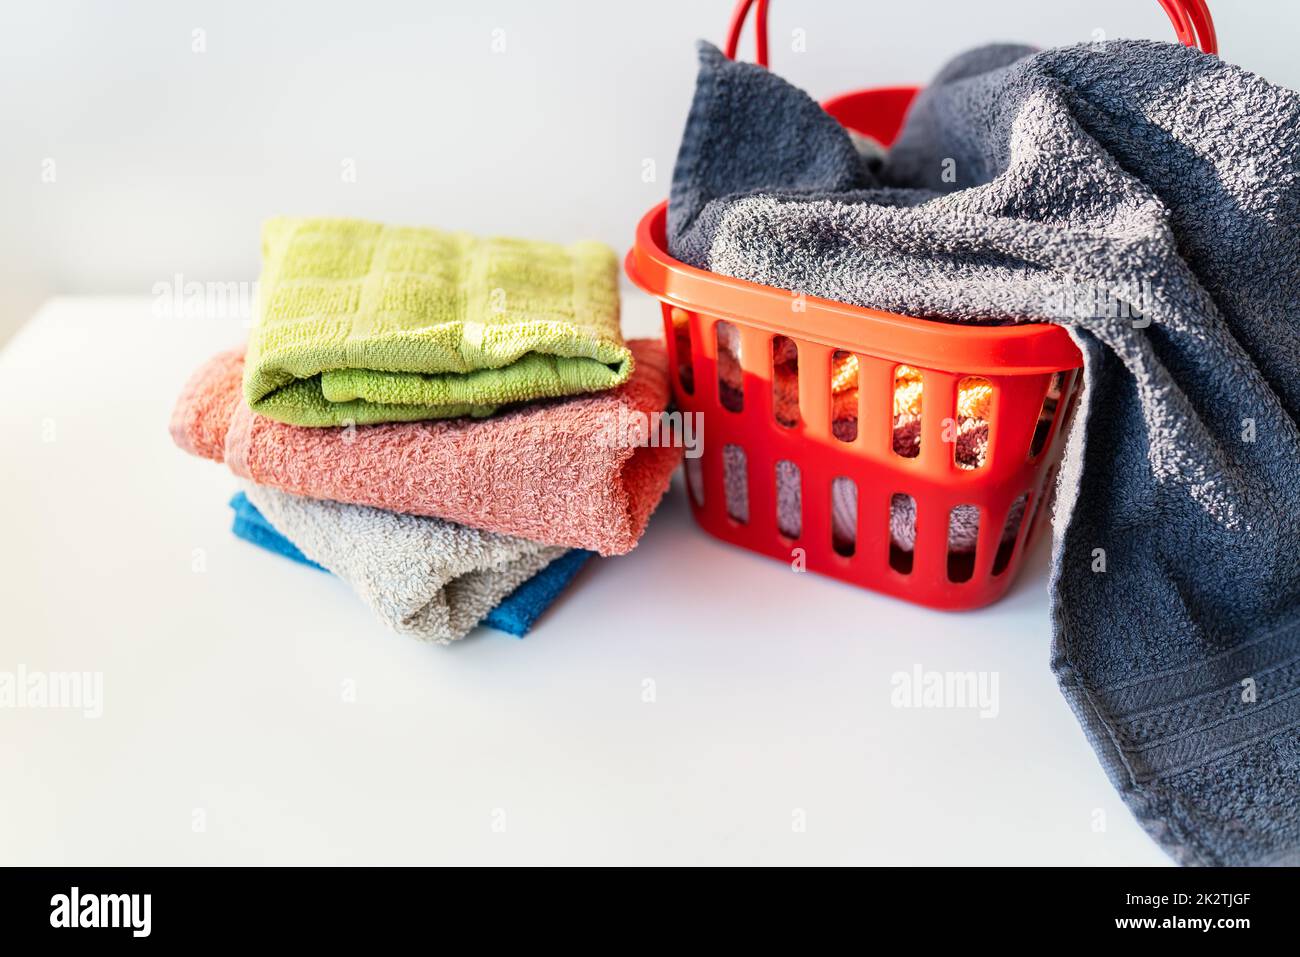 https://c8.alamy.com/comp/2K2TJGF/multi-colored-towels-lie-in-a-red-laundry-basket-on-a-white-background-washing-and-ironing-clothes-top-view-2K2TJGF.jpg